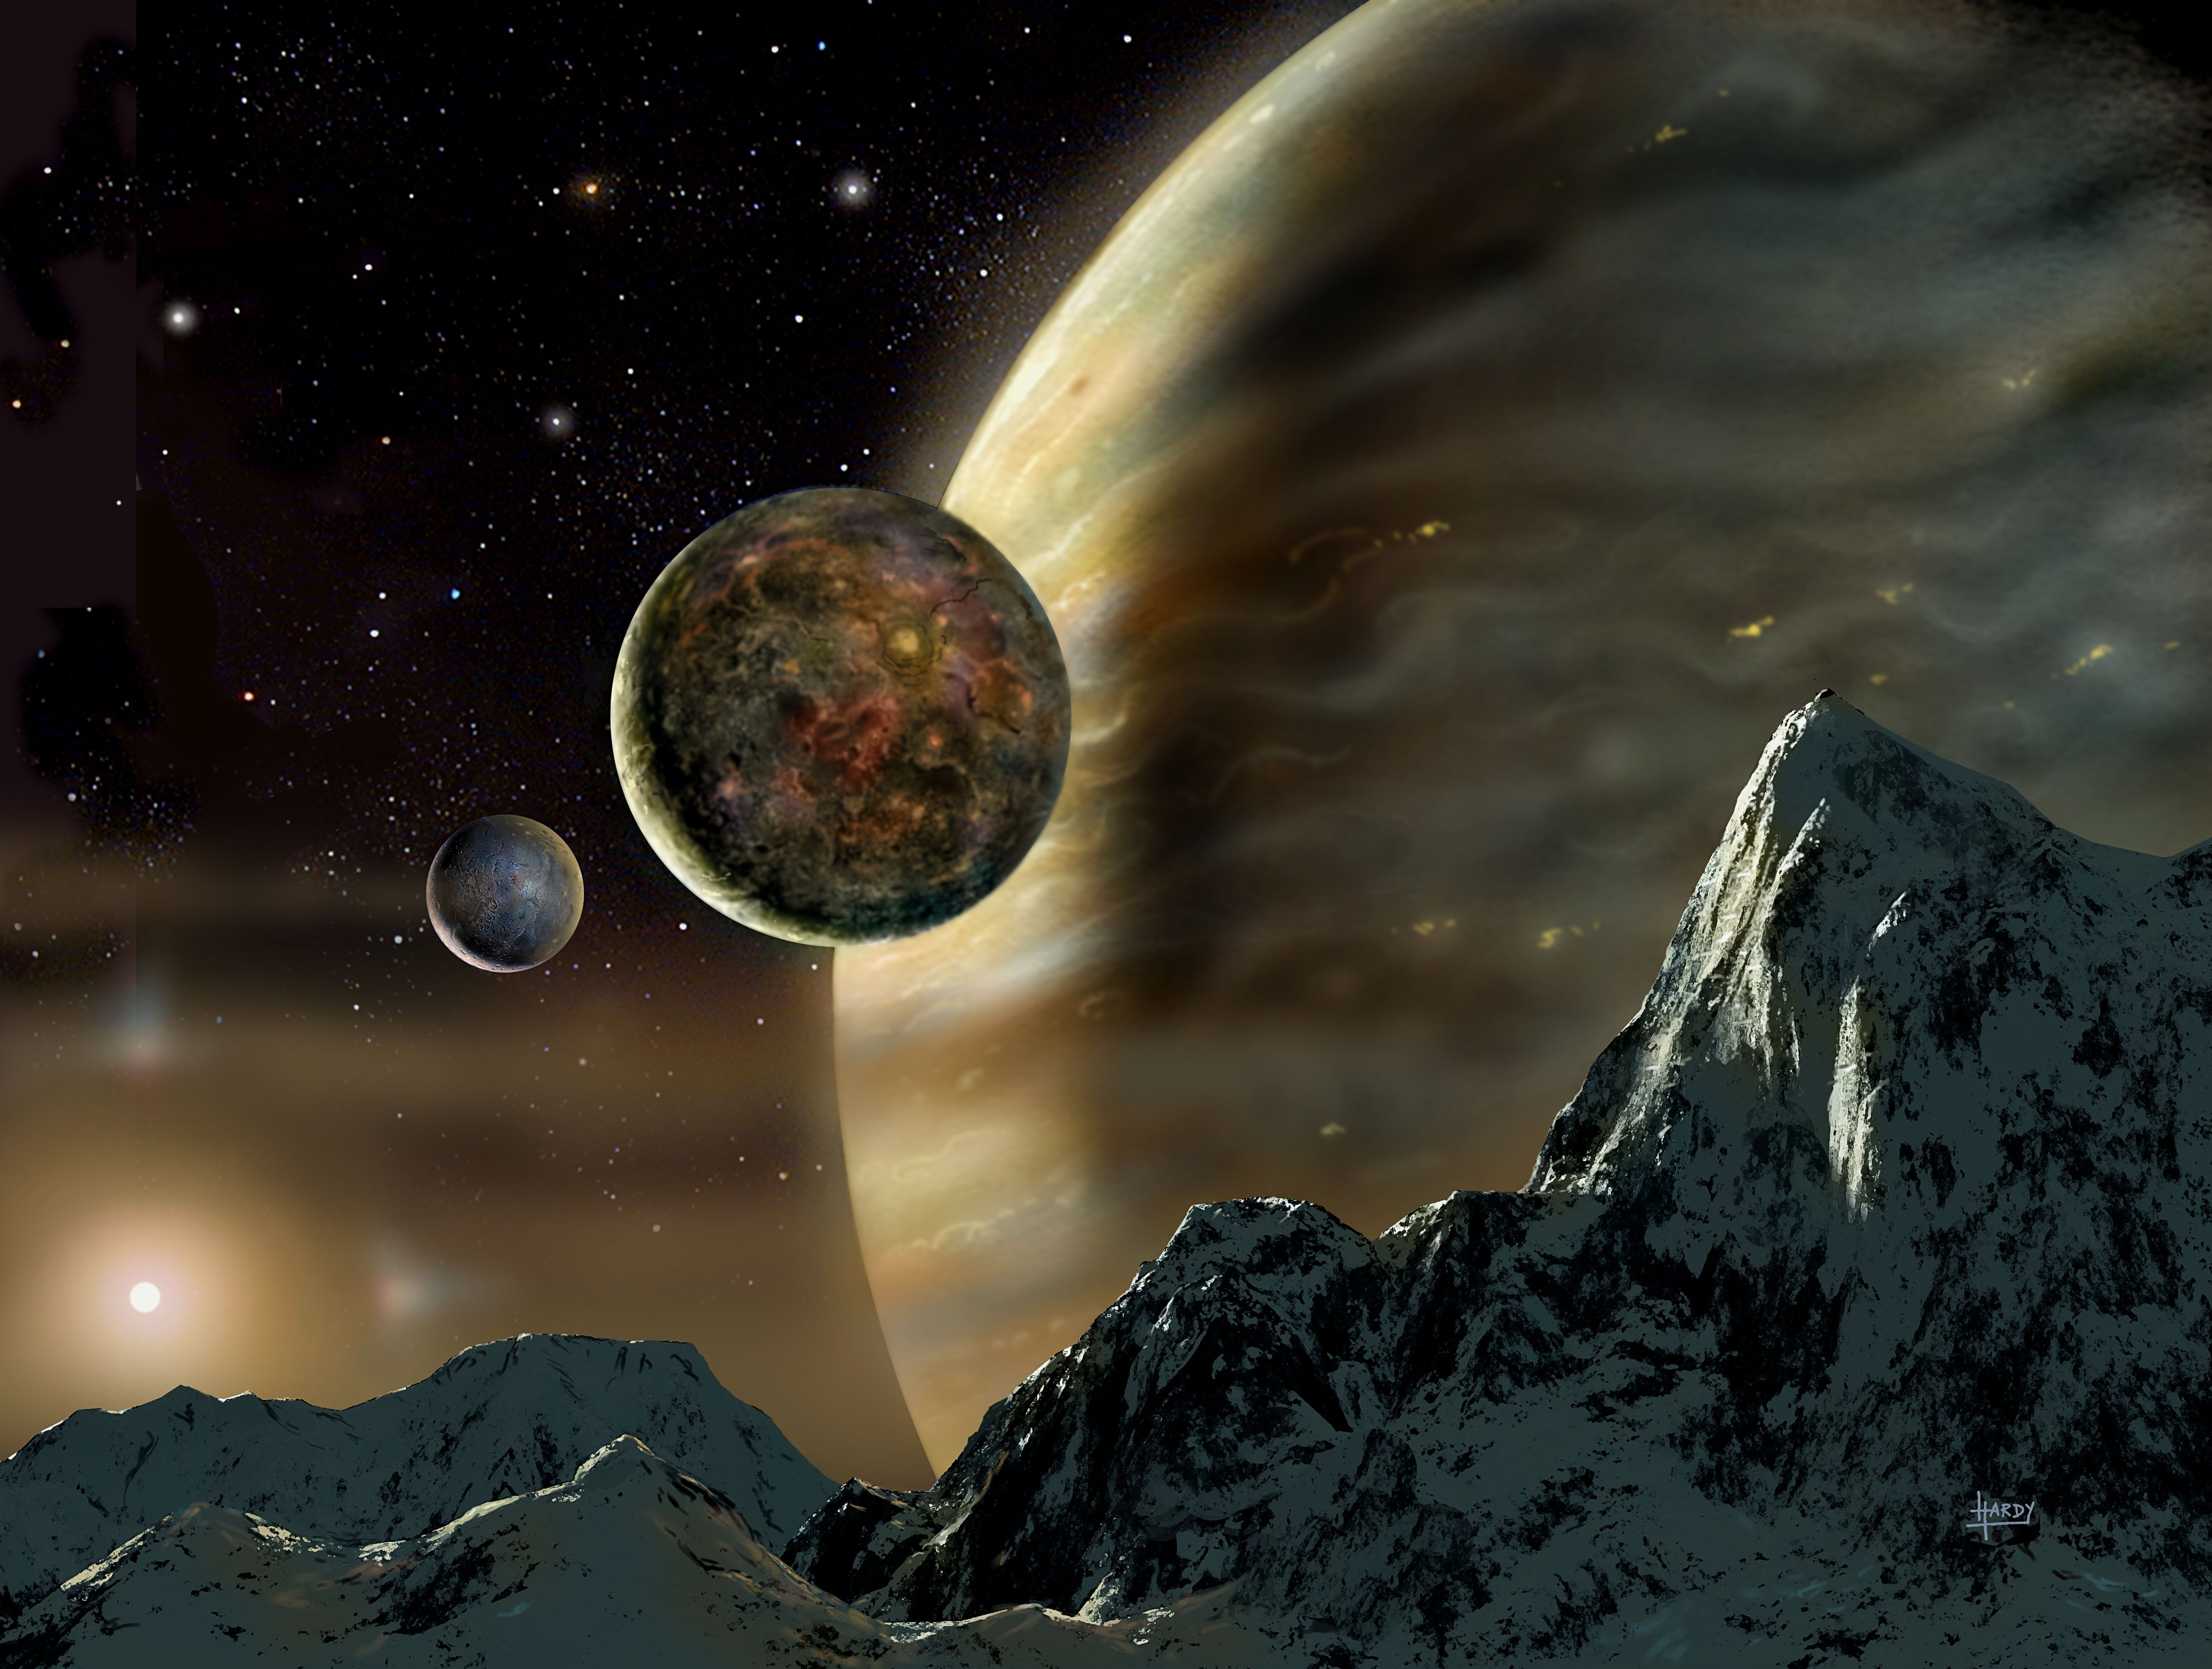 image of a possible scene from a moon orbiting the extra-solar planet